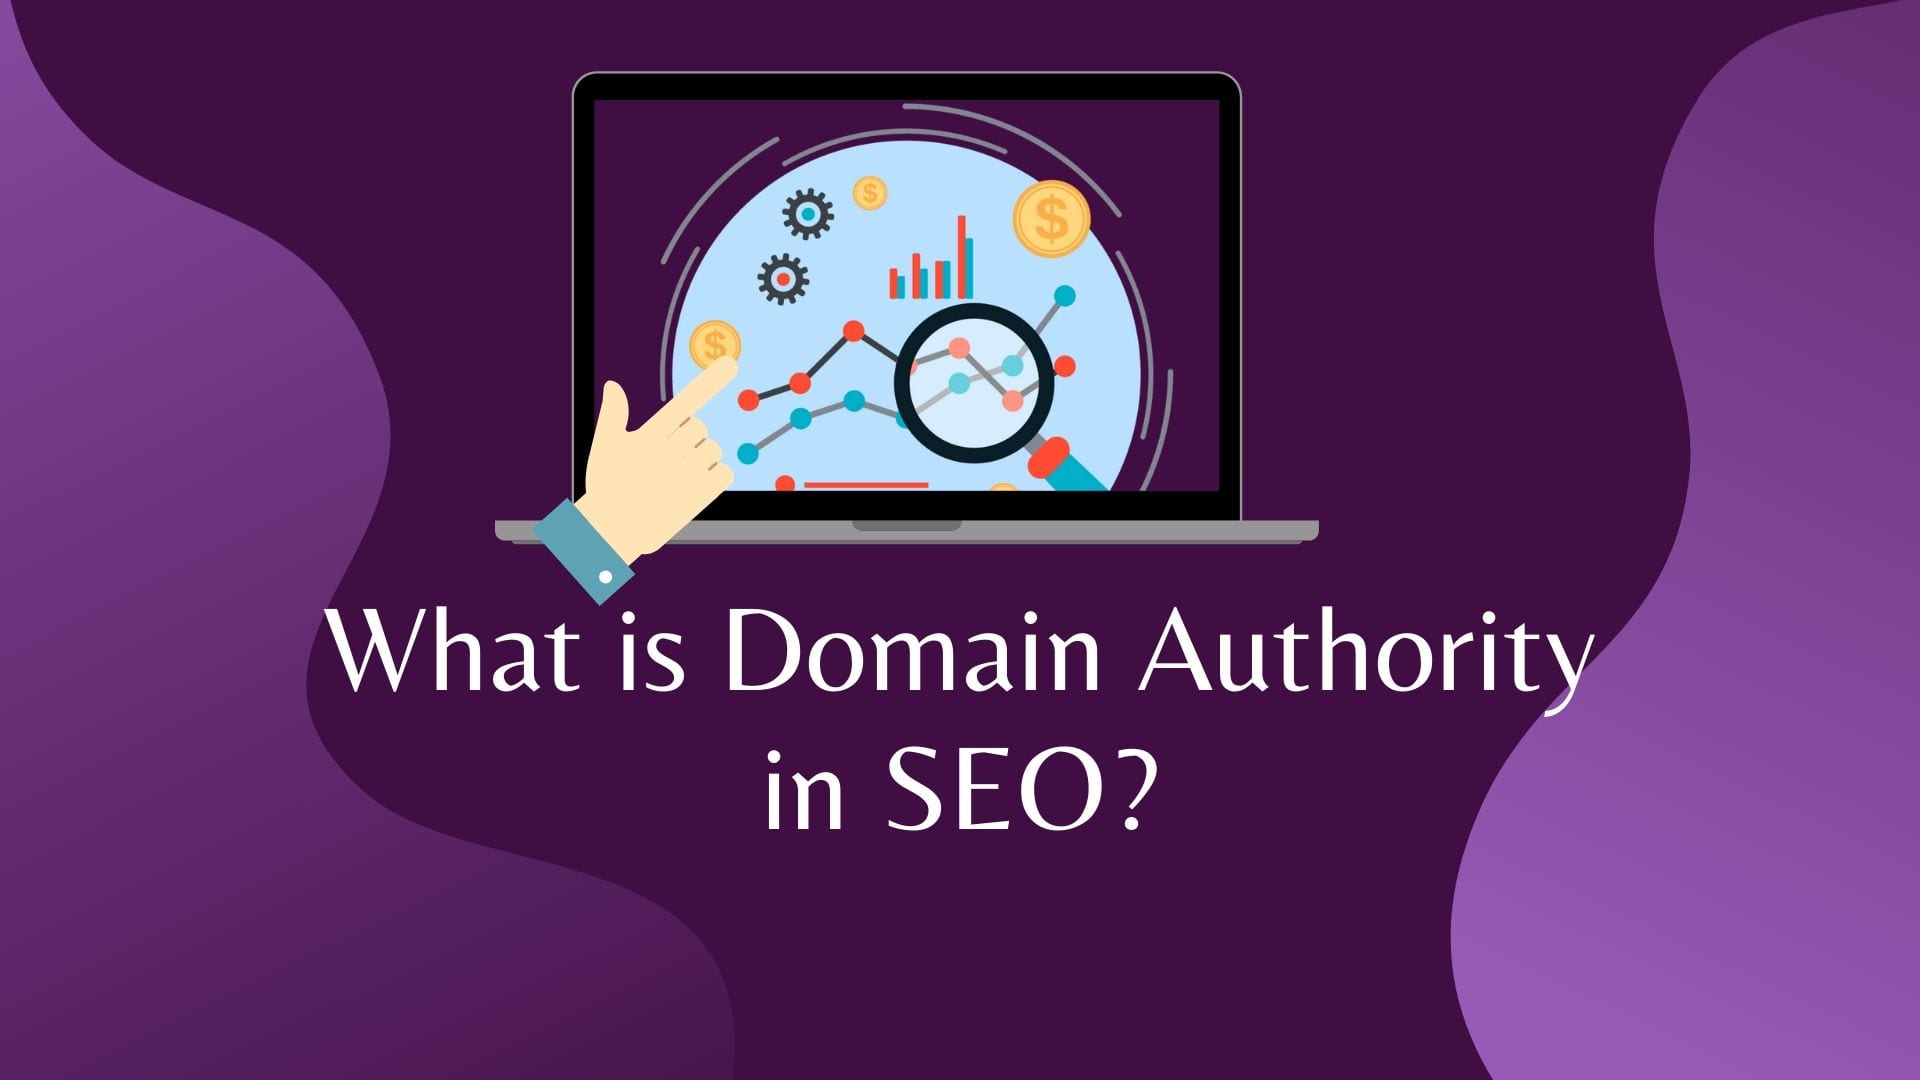 What is Domain Authority in SEO?